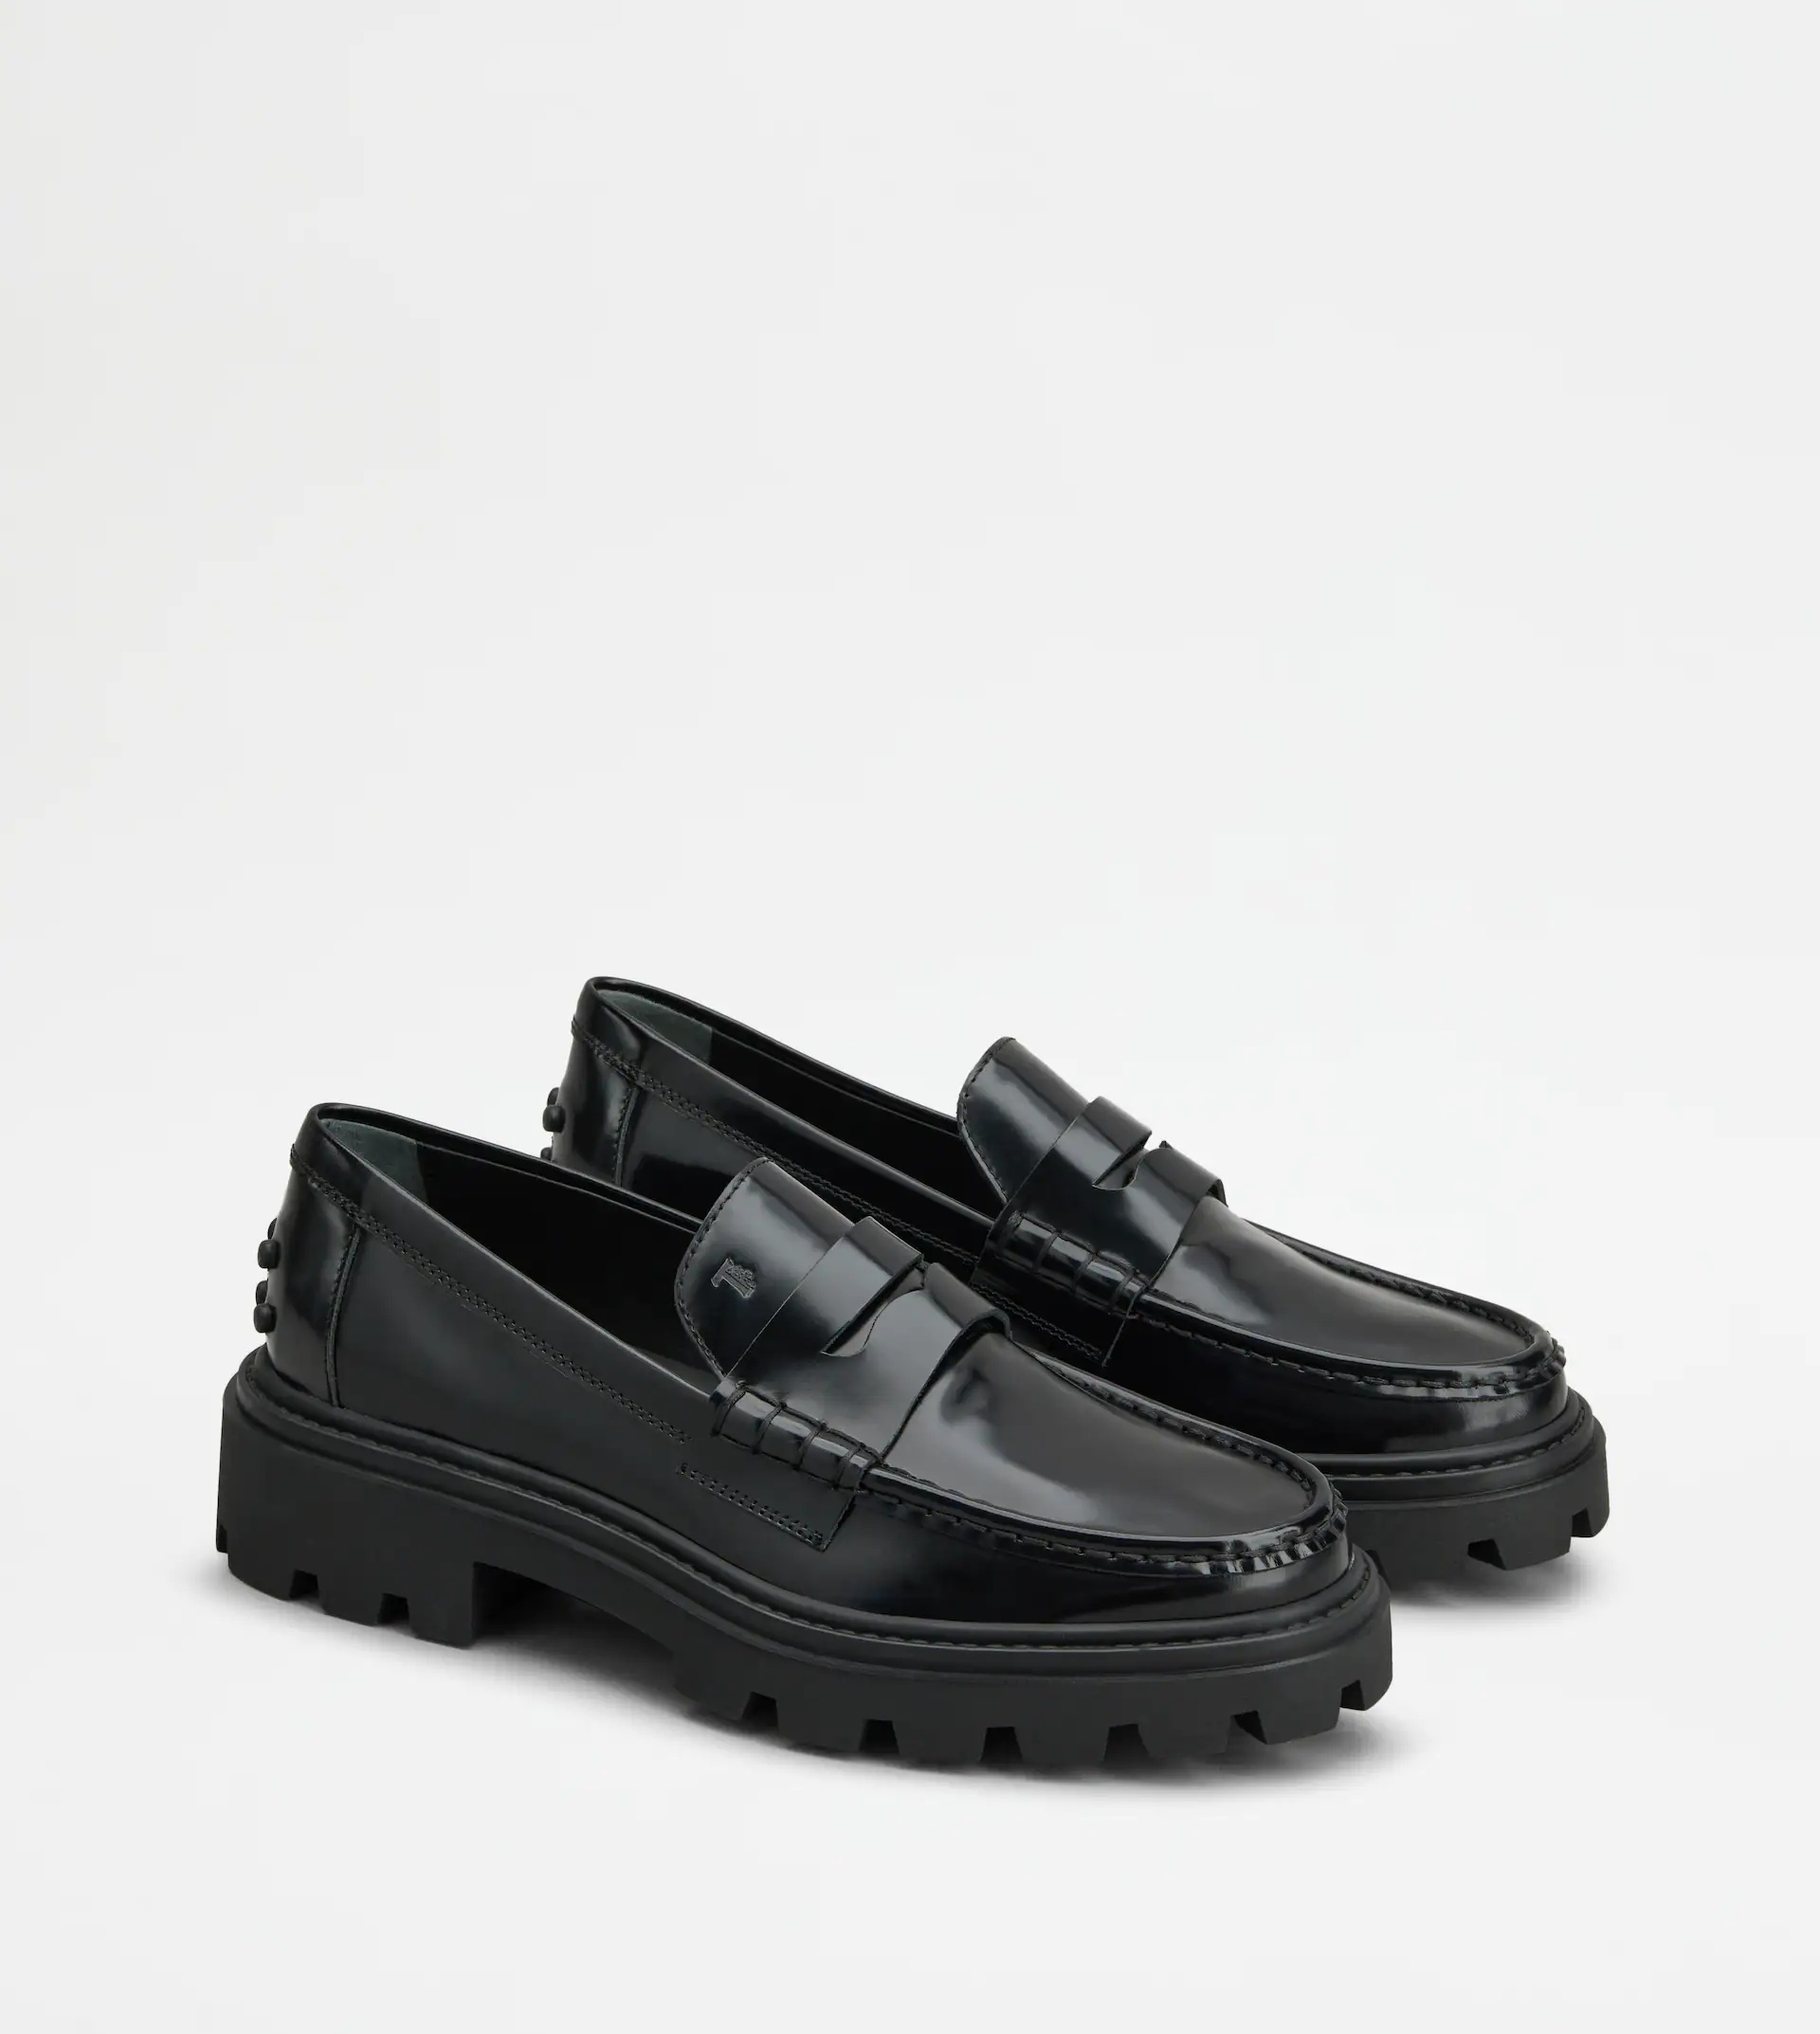 TOD'S LOAFERS IN LEATHER - BLACK - 3